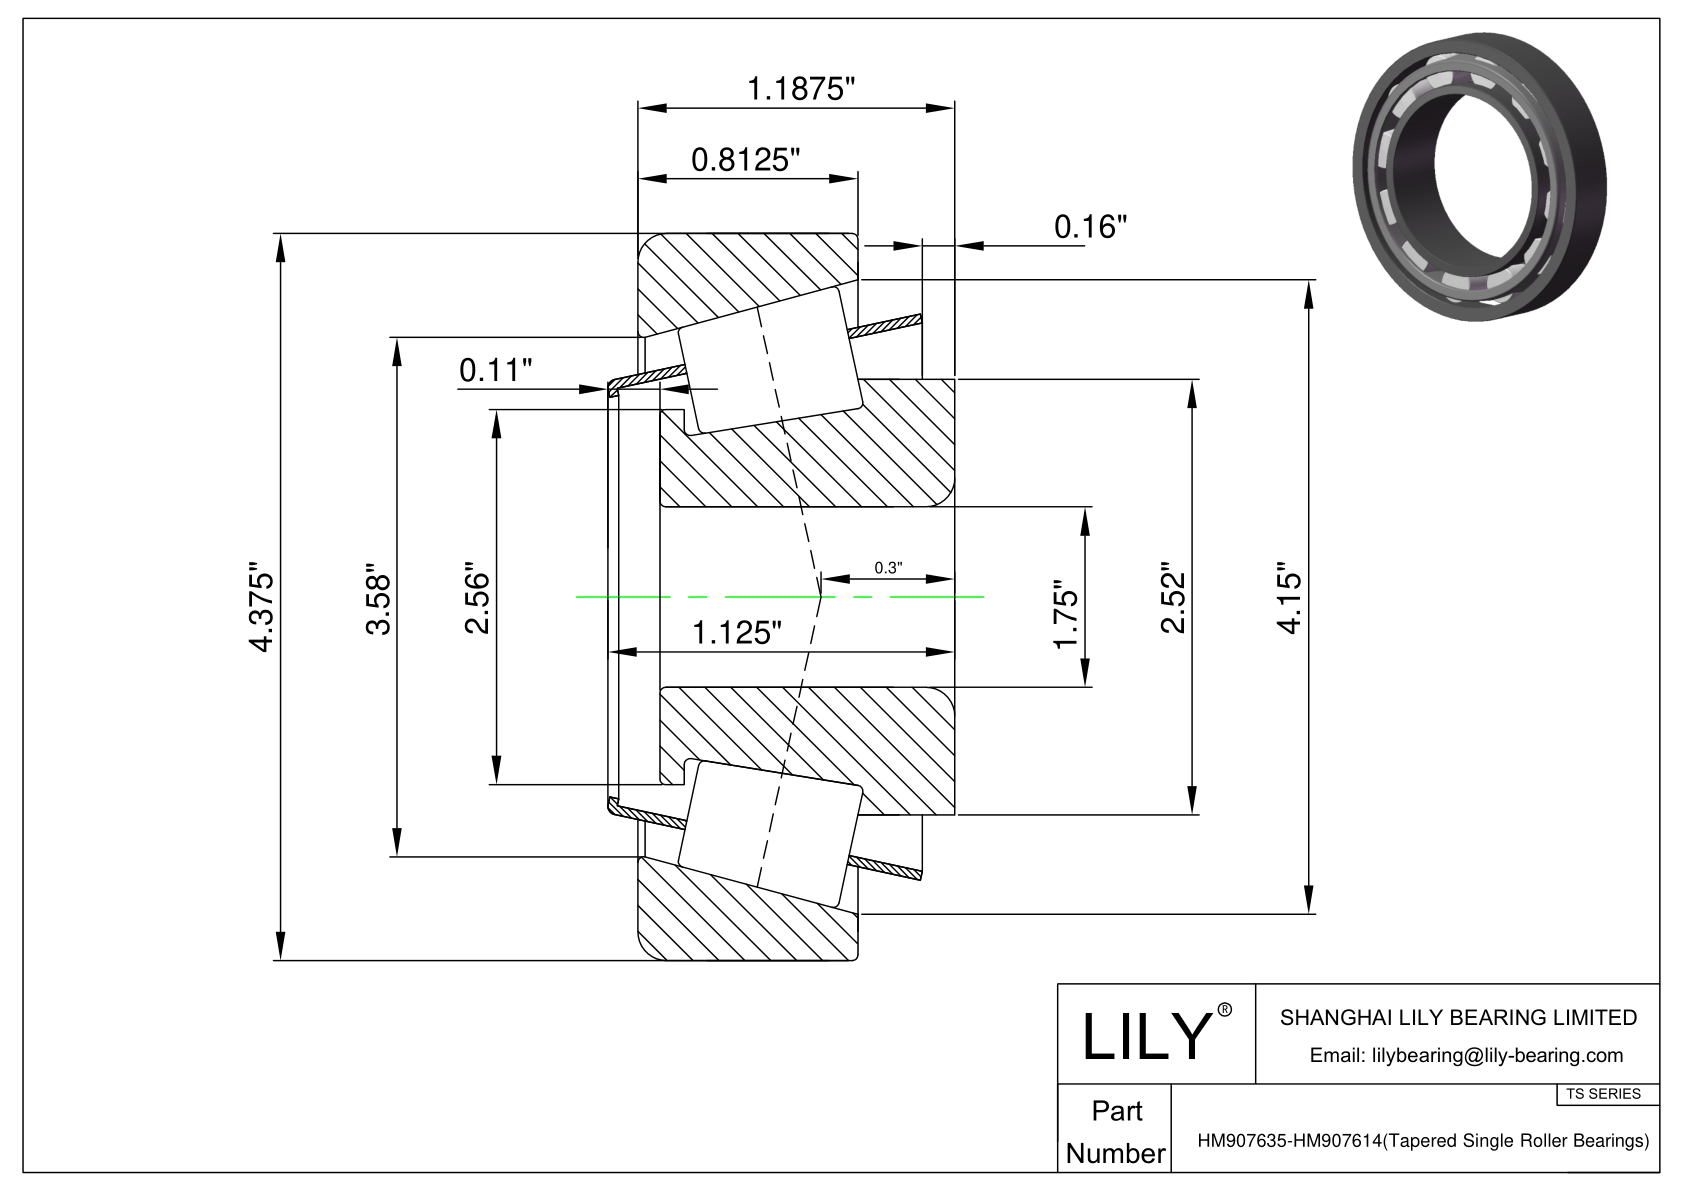 HM907635-HM907614 TS (Tapered Single Roller Bearings) (Imperial) cad drawing